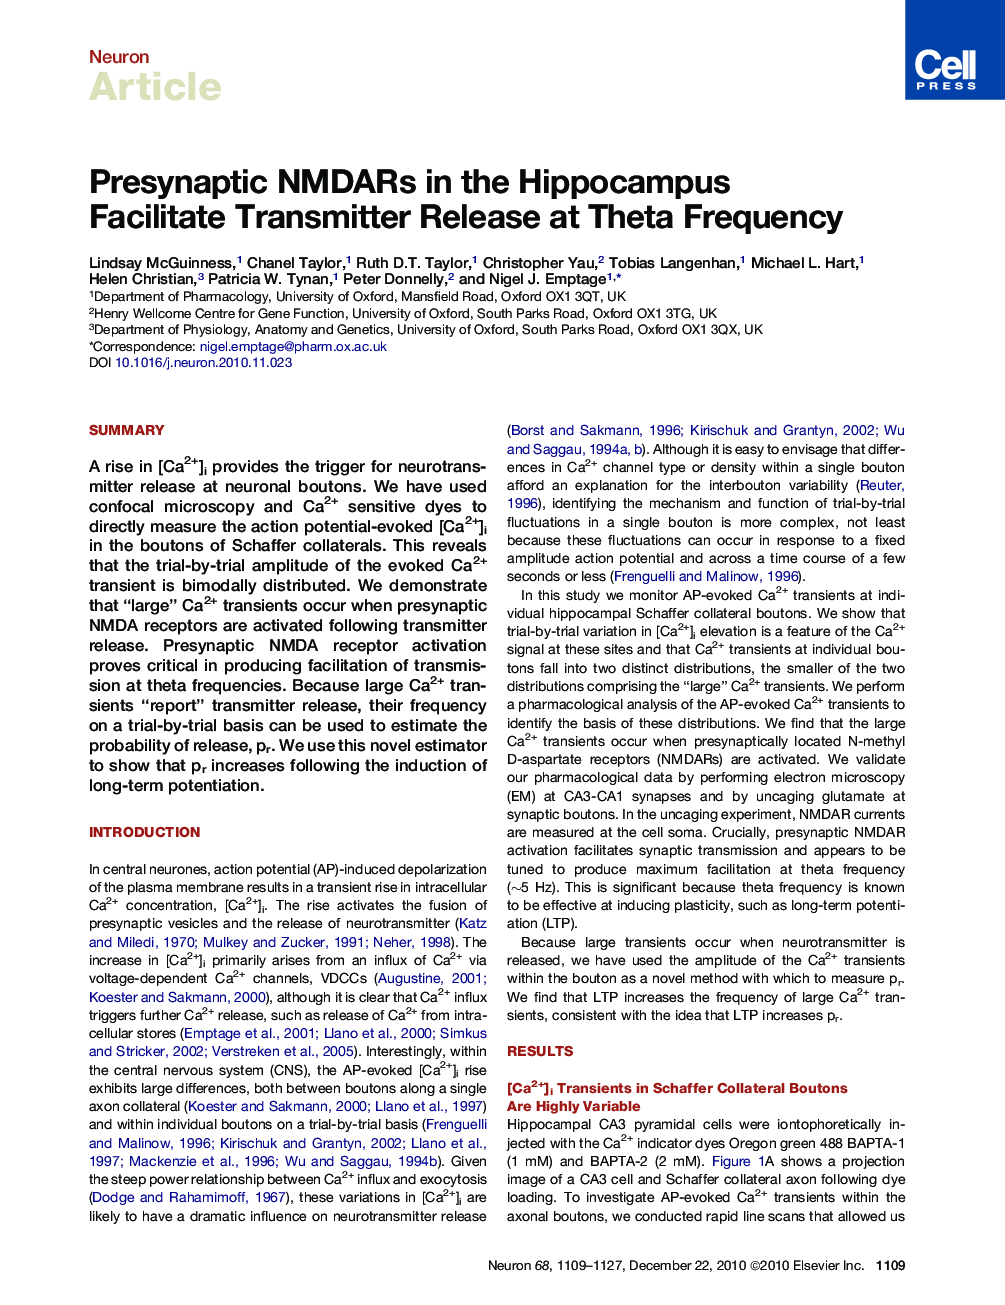 Presynaptic NMDARs in the Hippocampus Facilitate Transmitter Release at Theta Frequency